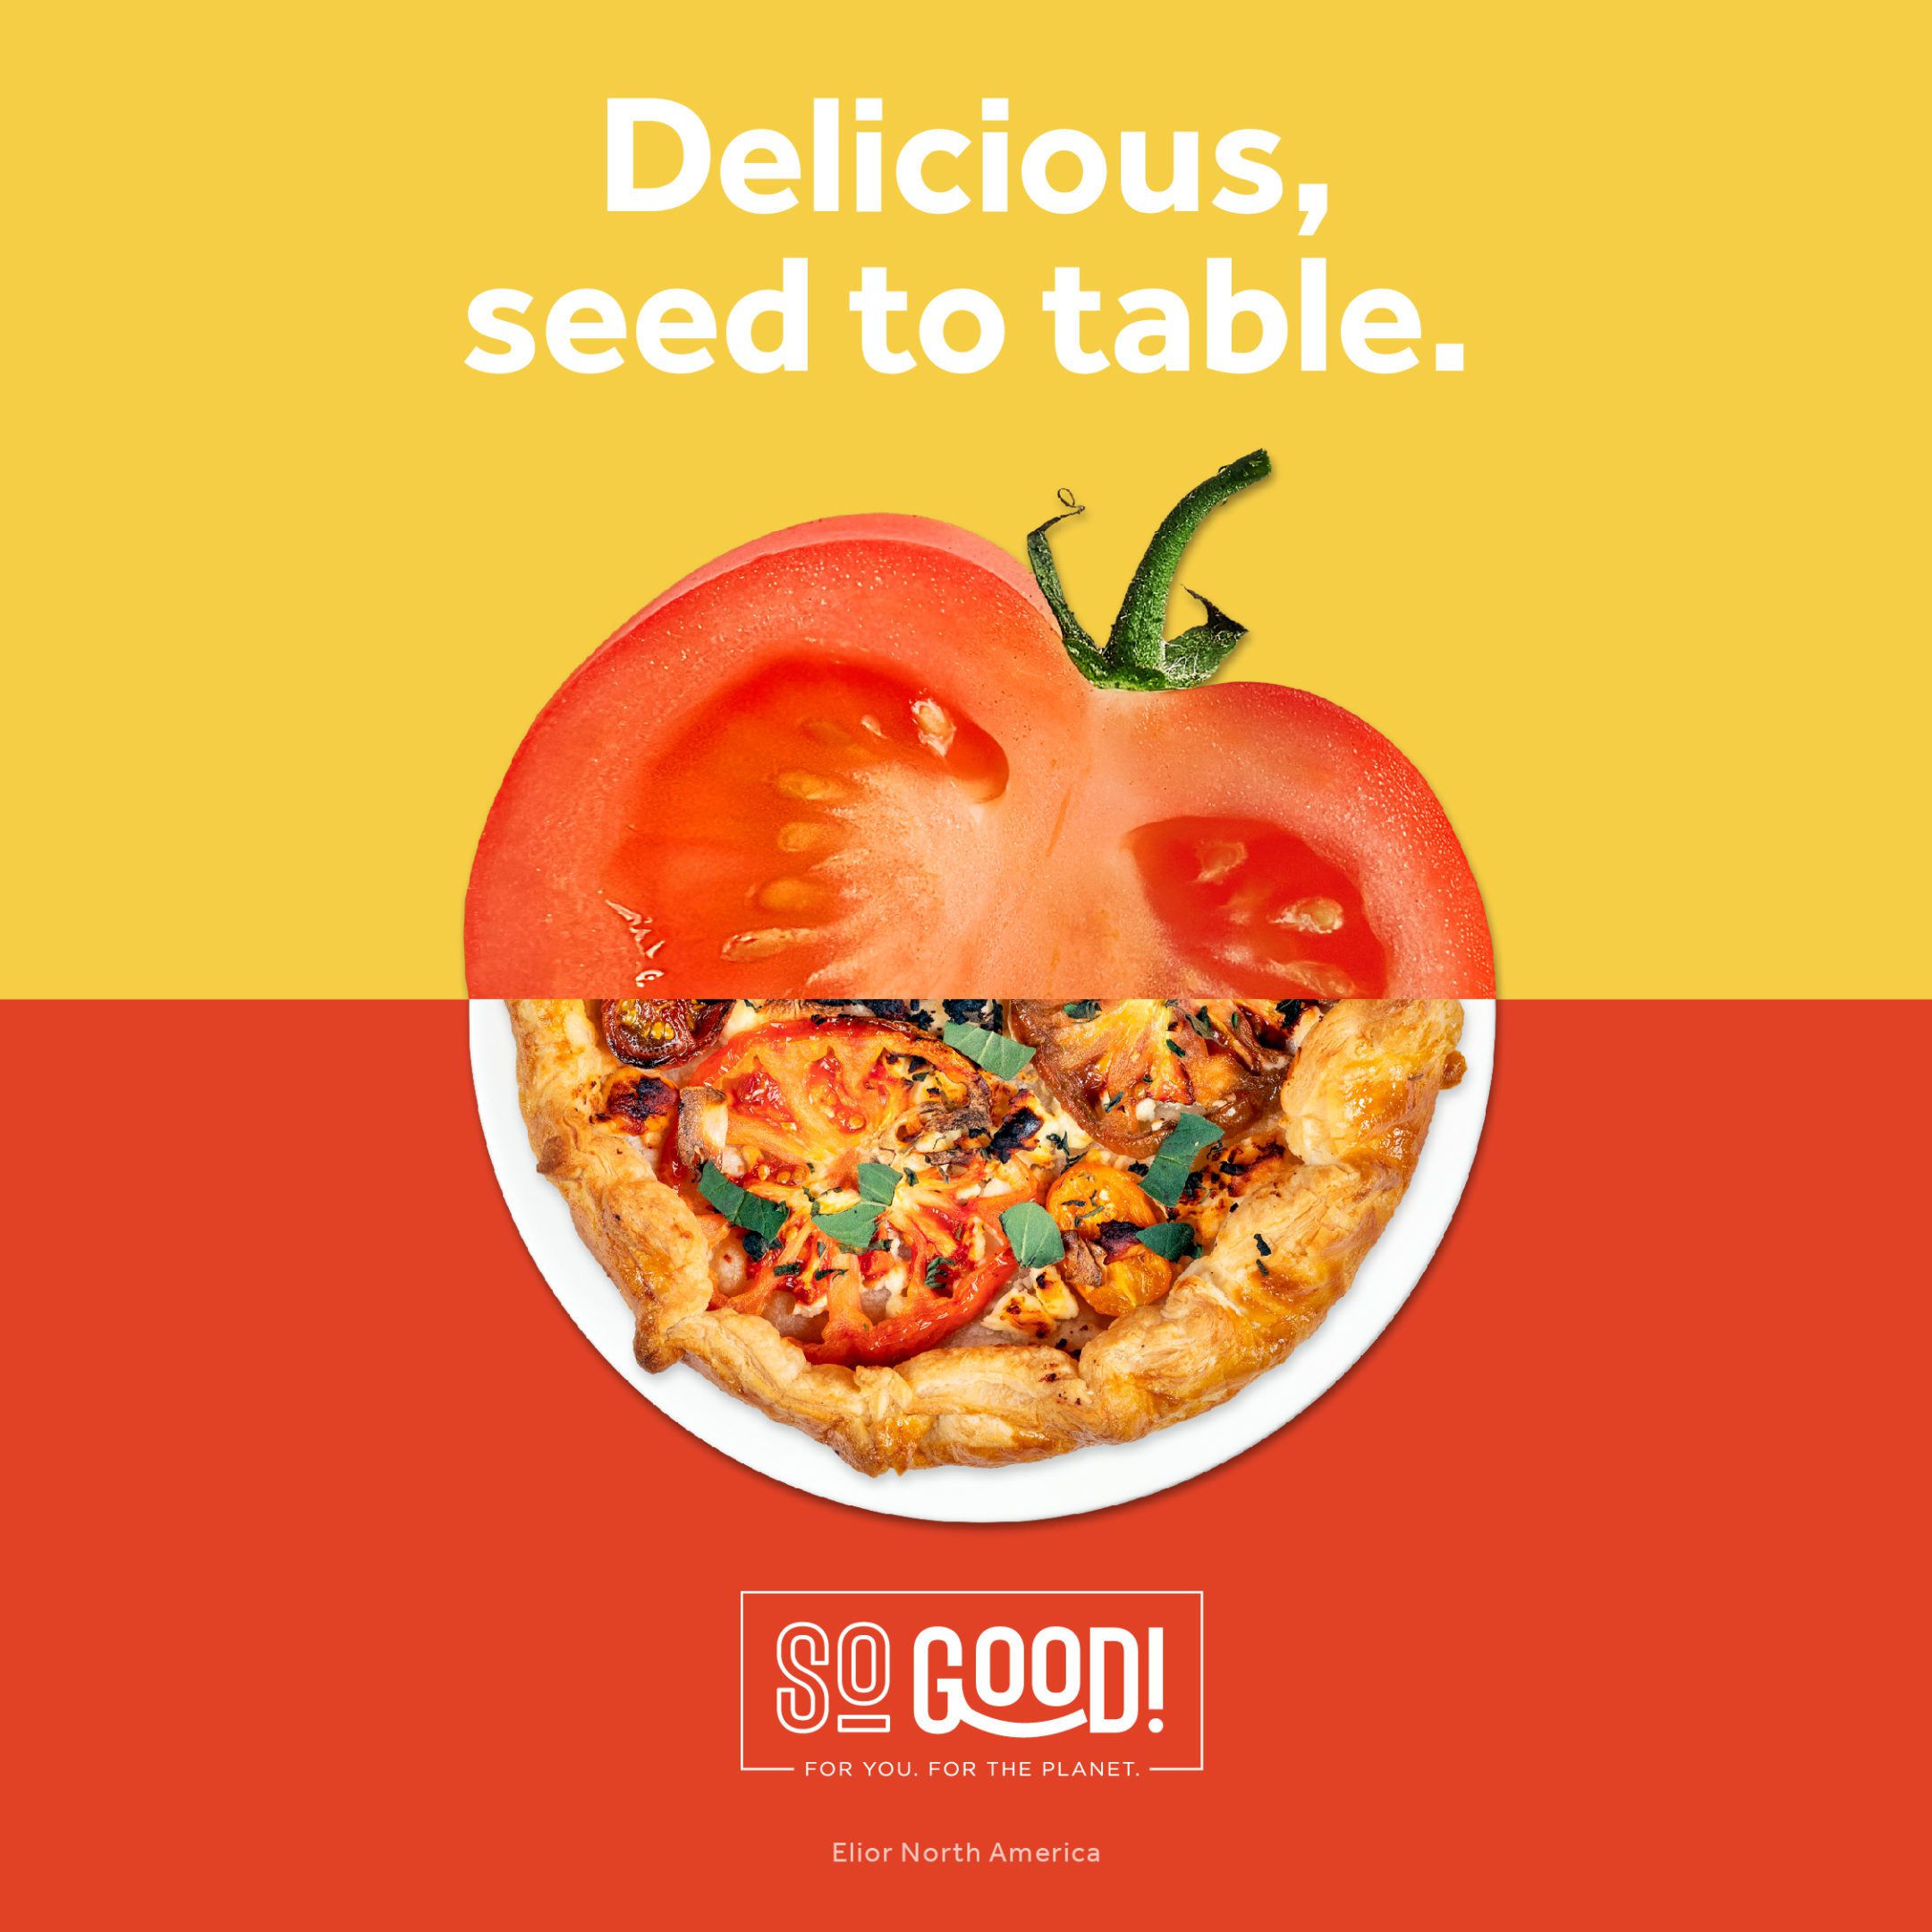 Delicious, seed to table.